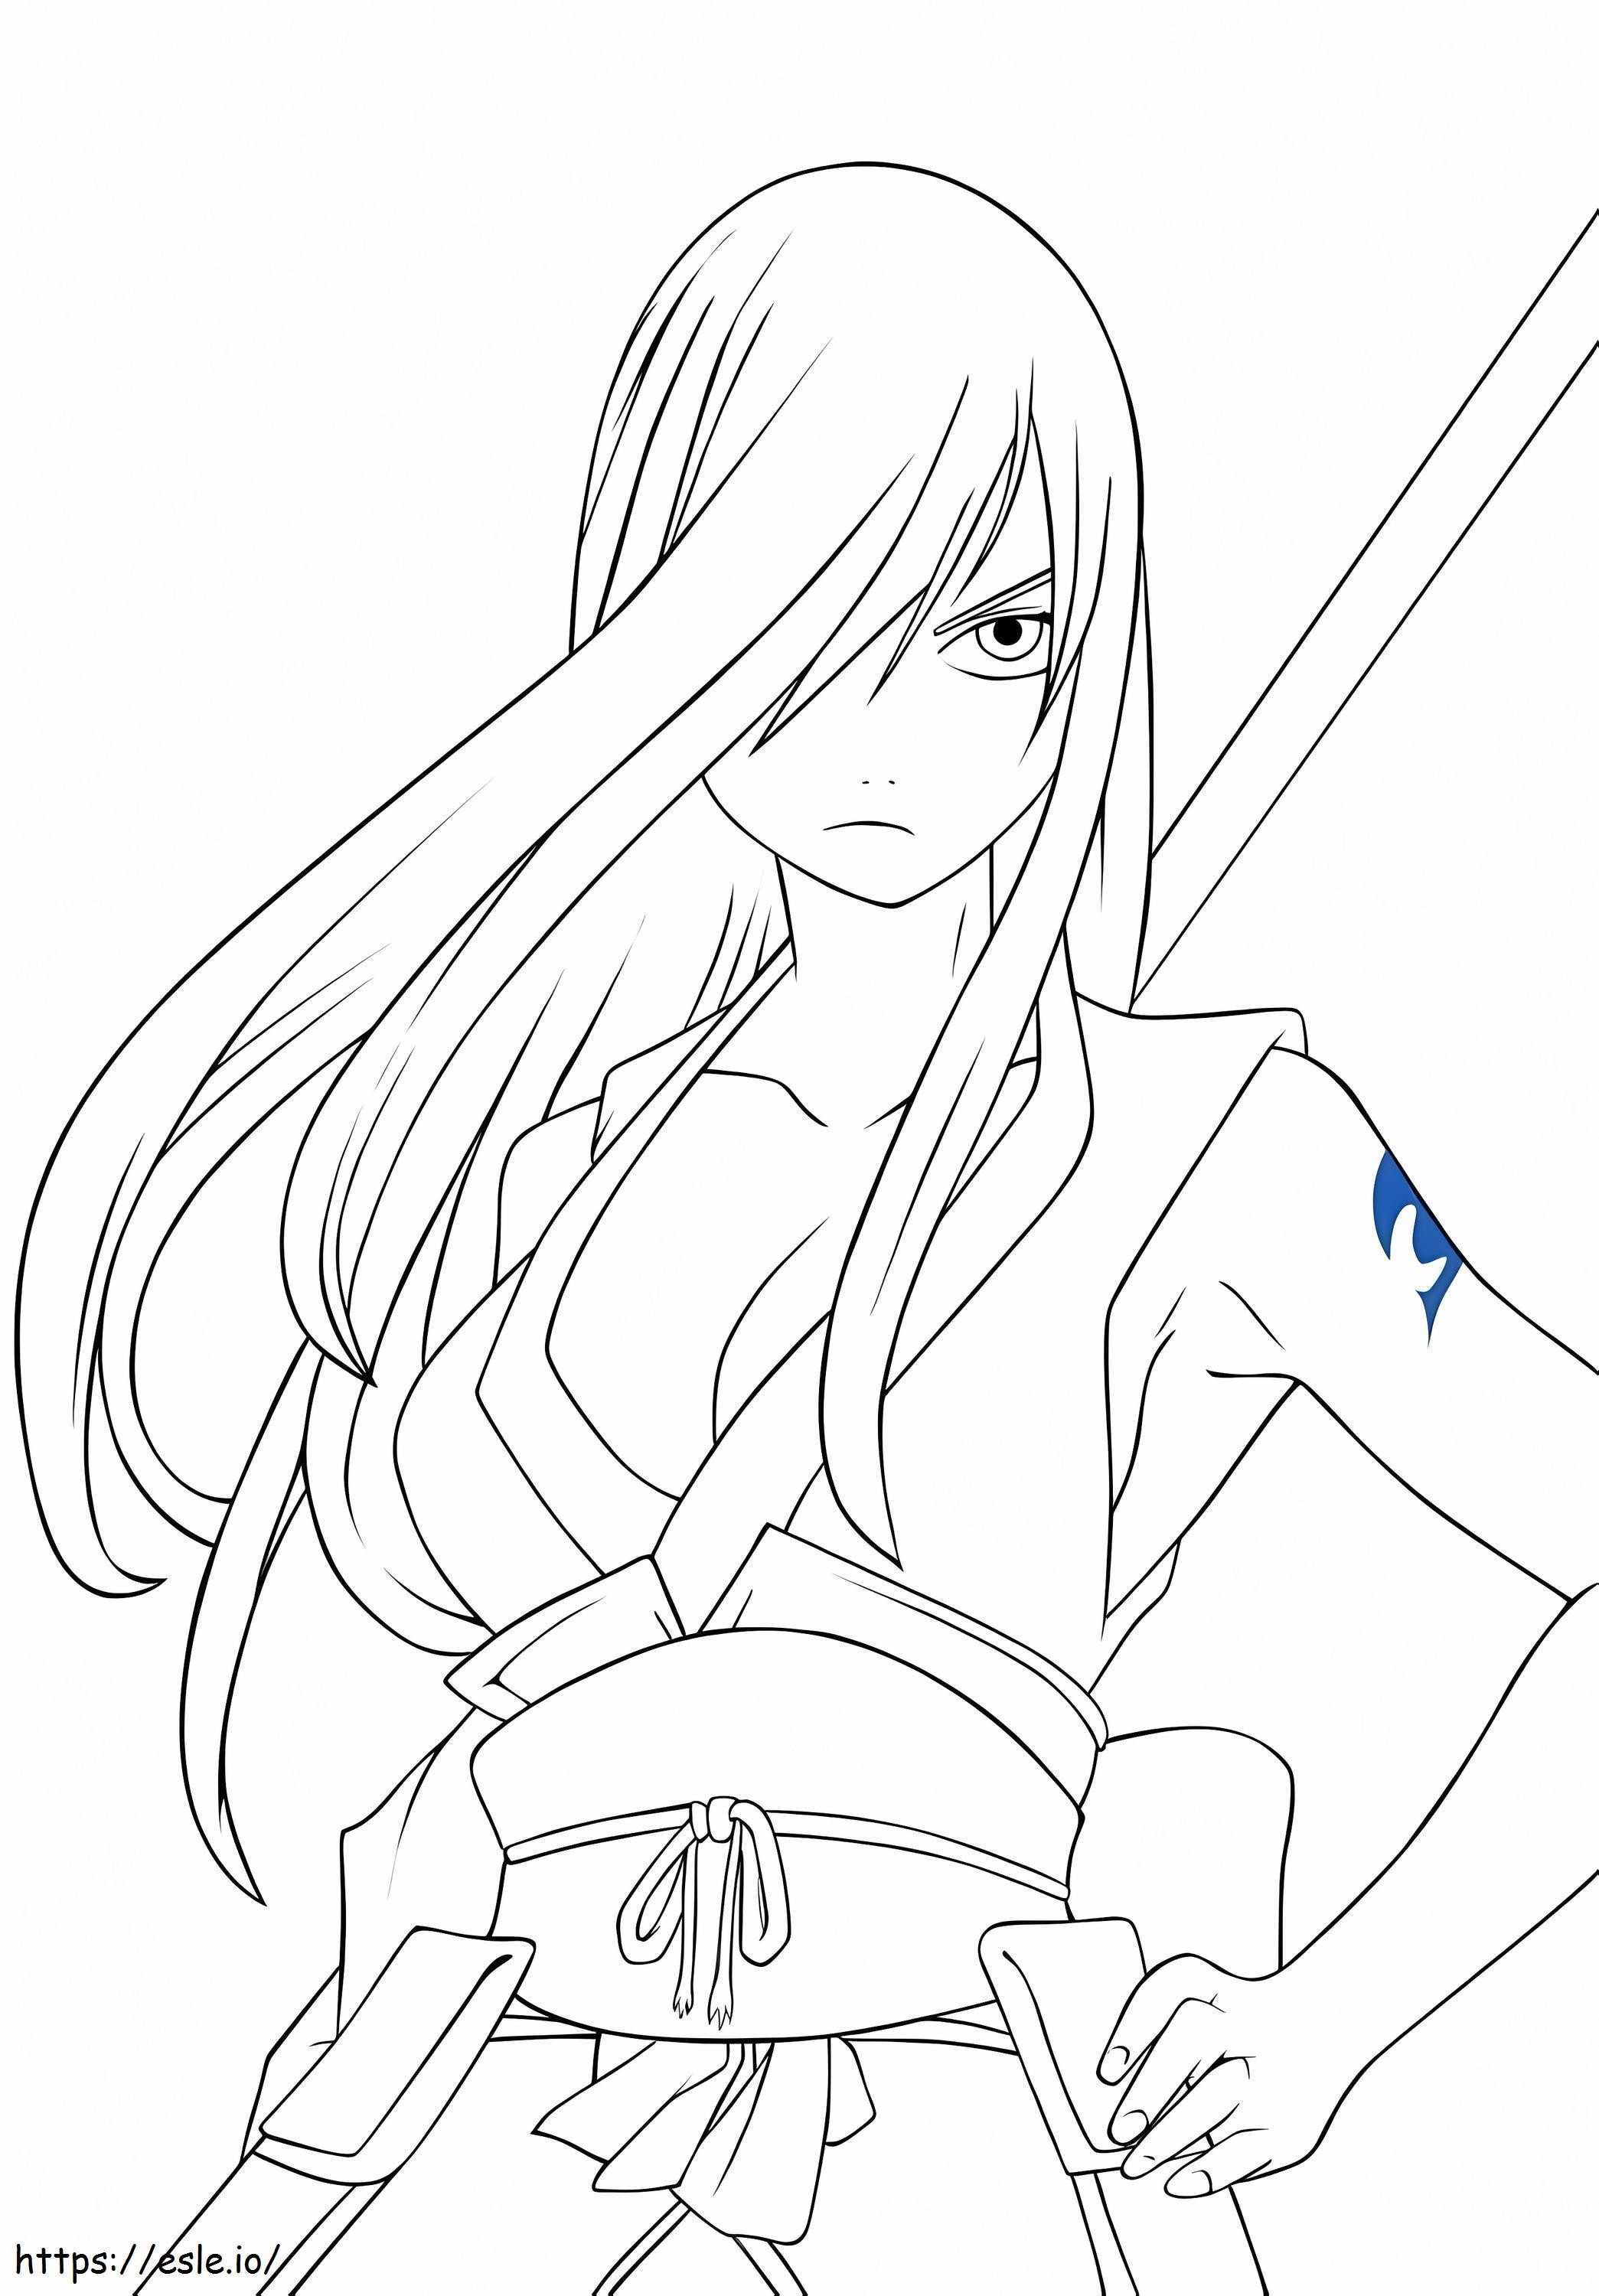 Erza Scarlett Fairy Tail 713X1024 coloring page